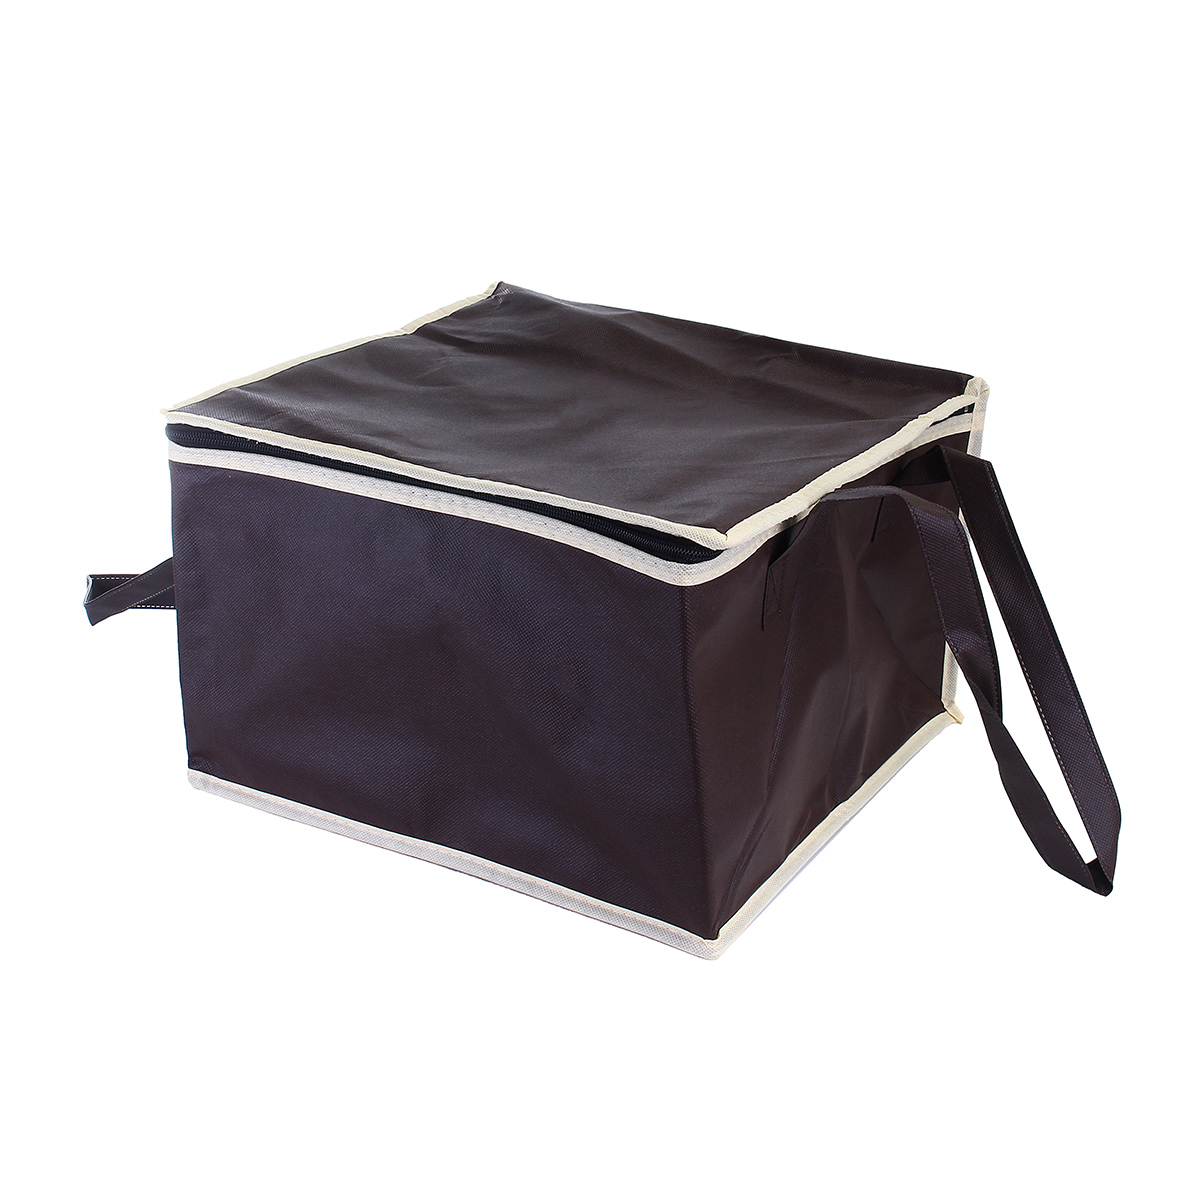 10-Inch-Non-woven-Fresh-Keeping-Tote-Bag-with-Zipper-Cake-Picnic-Lunch-Bag-Reusable-Grocery-Bag-1353010-5